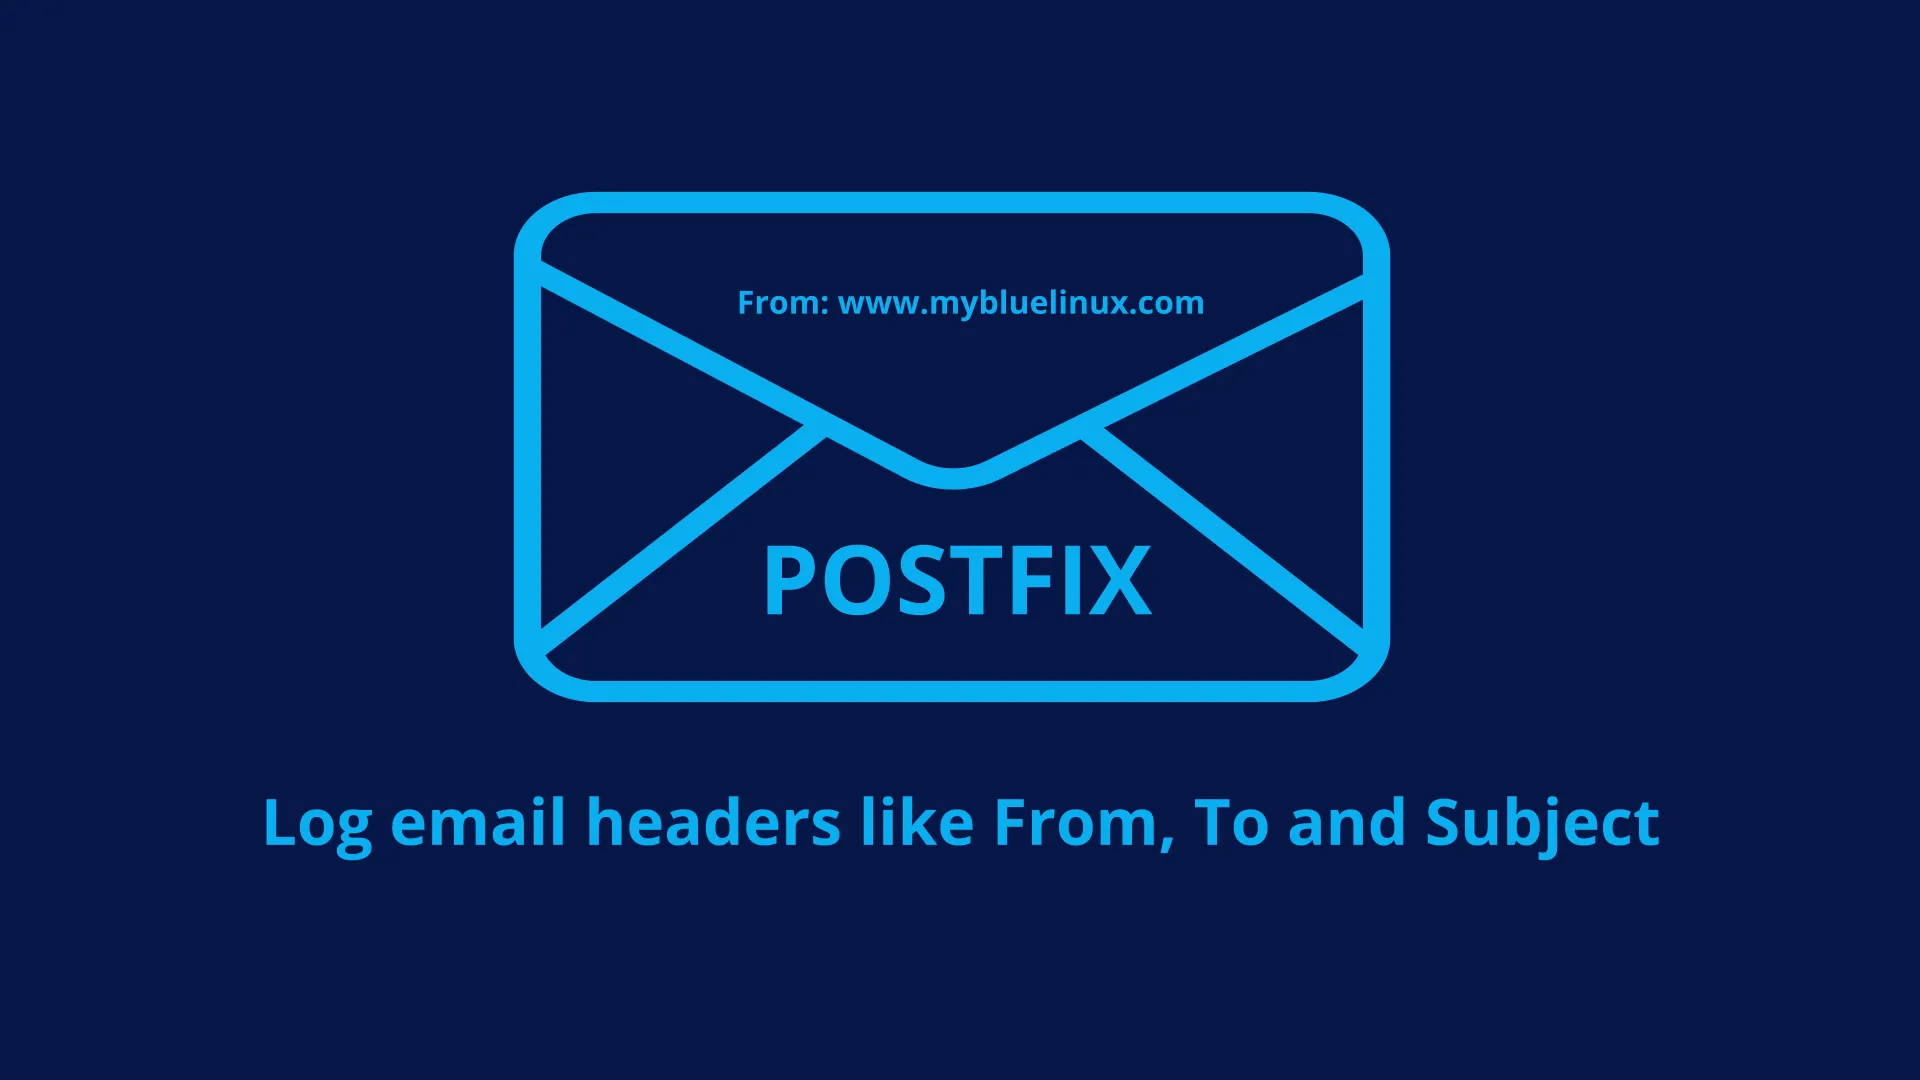 Postfix - how log email headers like From, To and Subject